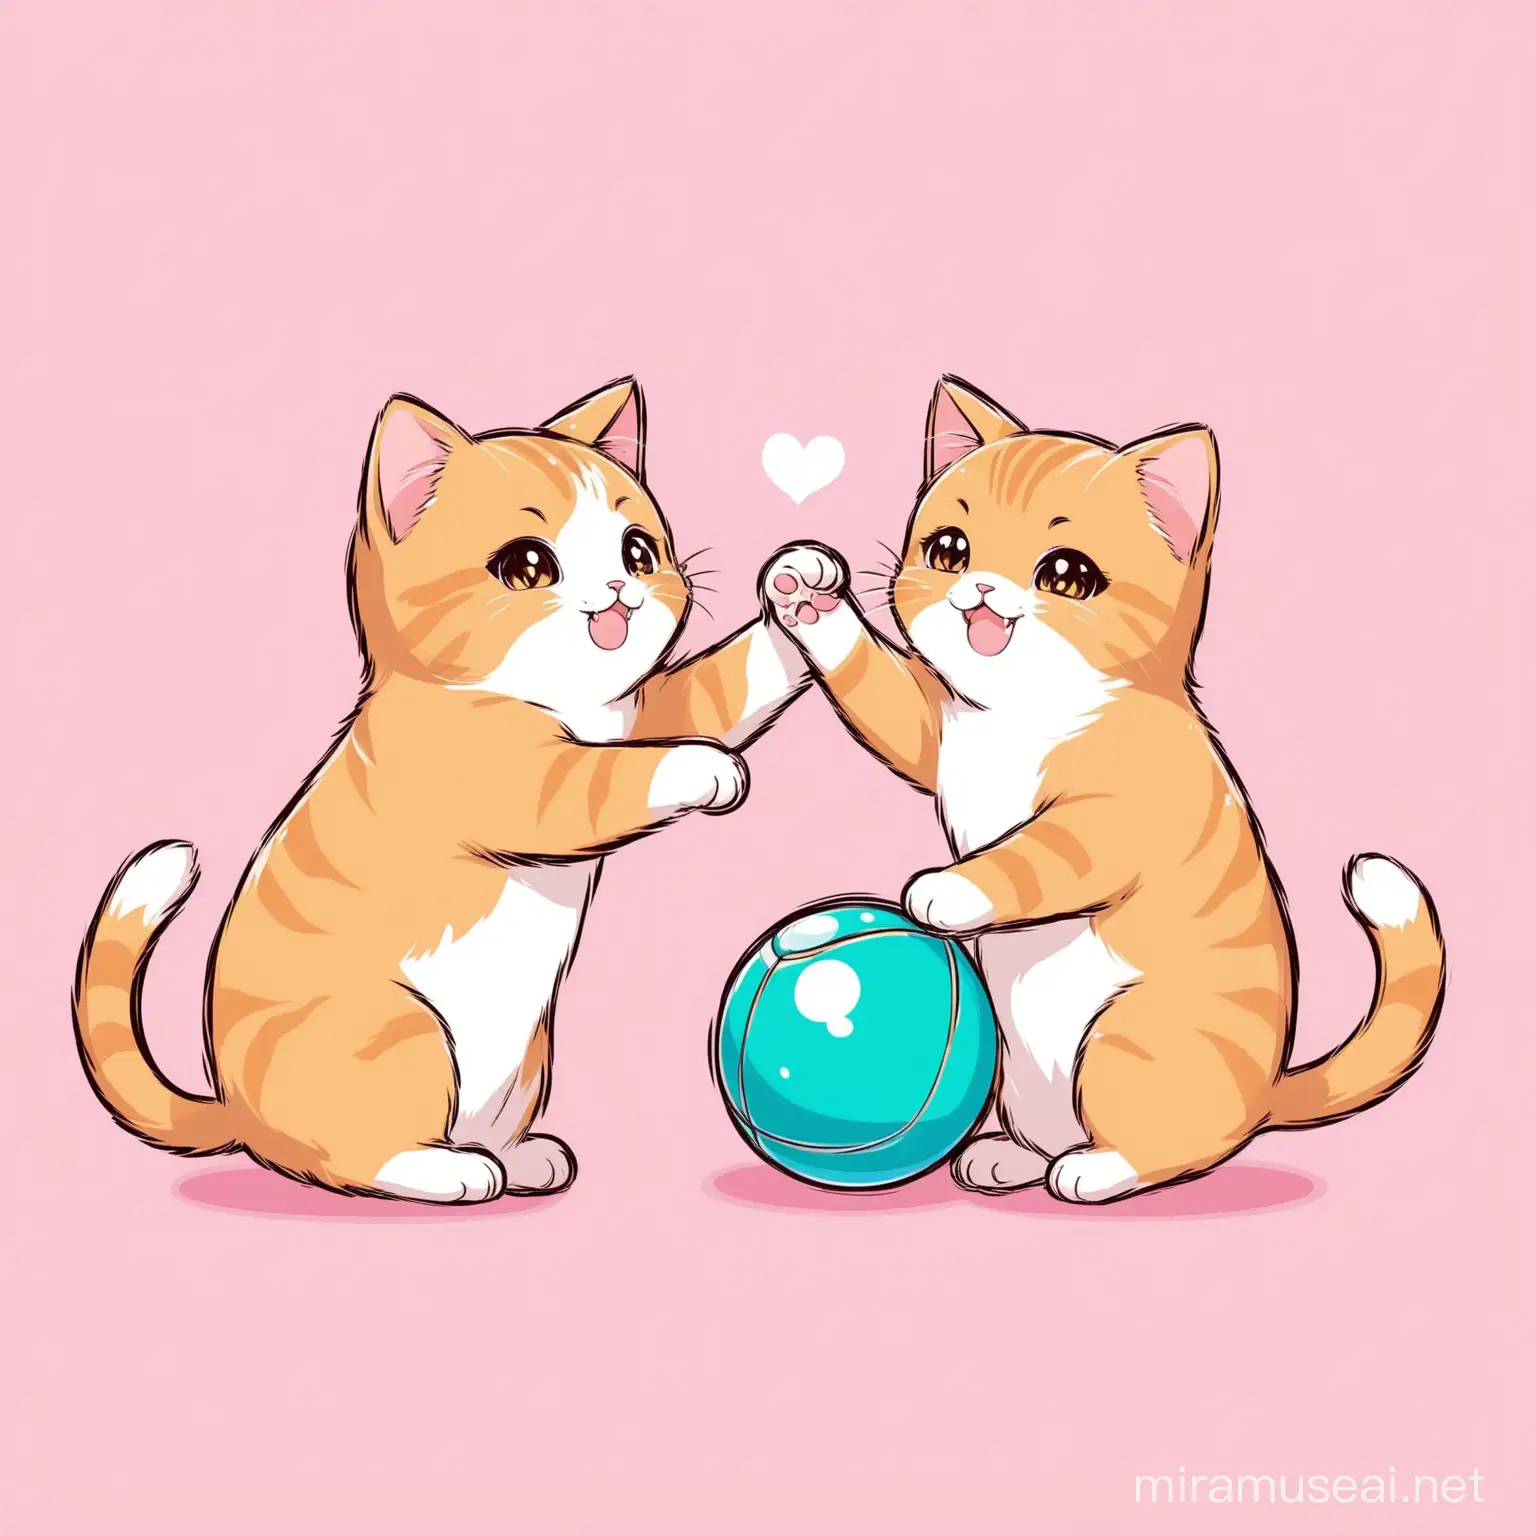 Adorable Cats Playfully Engage with a Ball